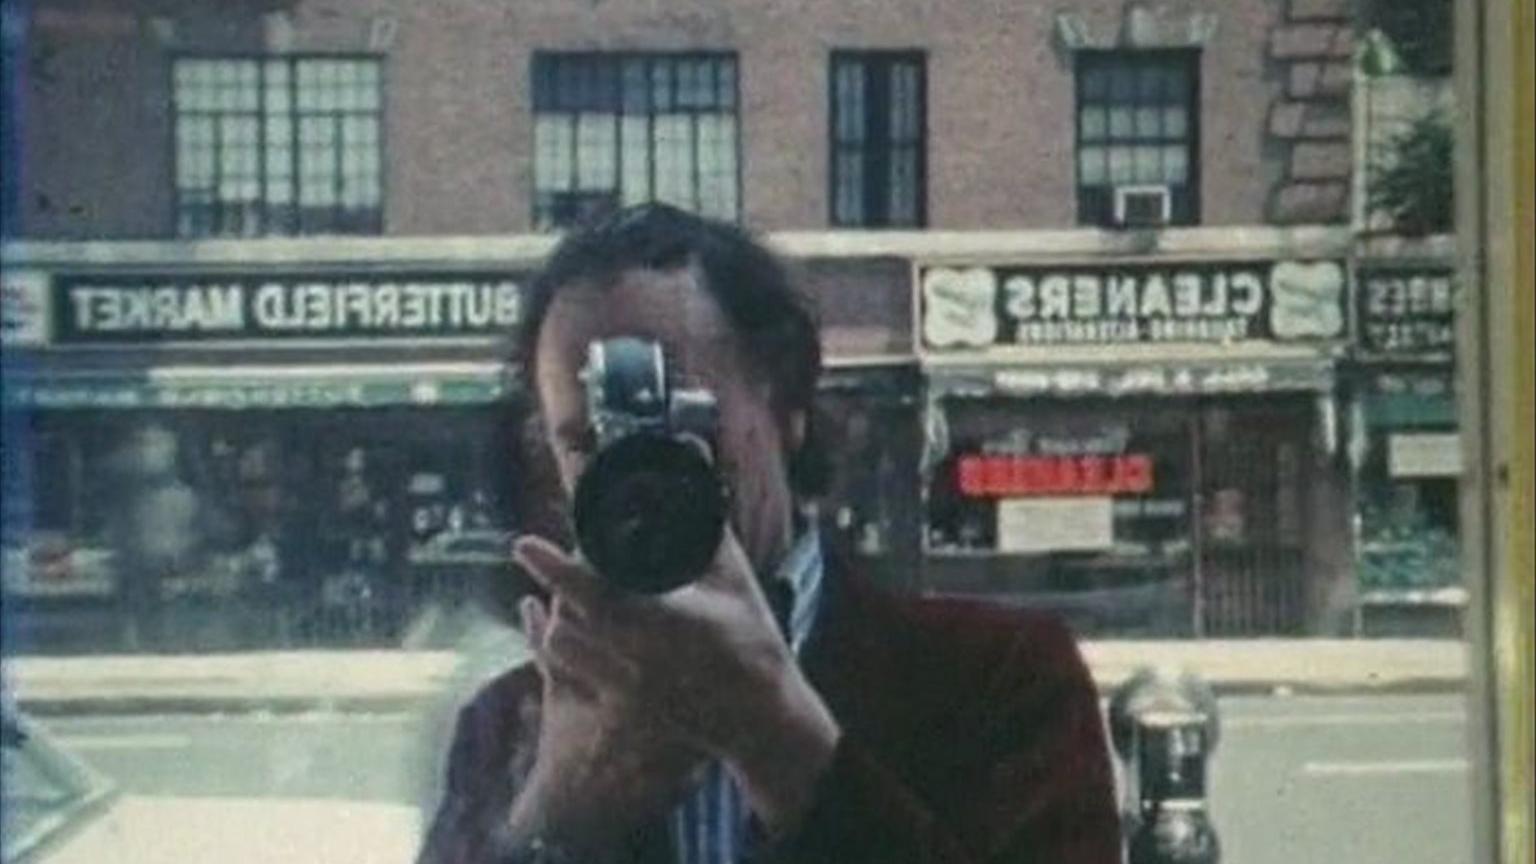 Still from the film "As I Was Moving Ahead Occasionally I Saw Brief Glimpses of Beauty" (2000) by Jonas Mekas